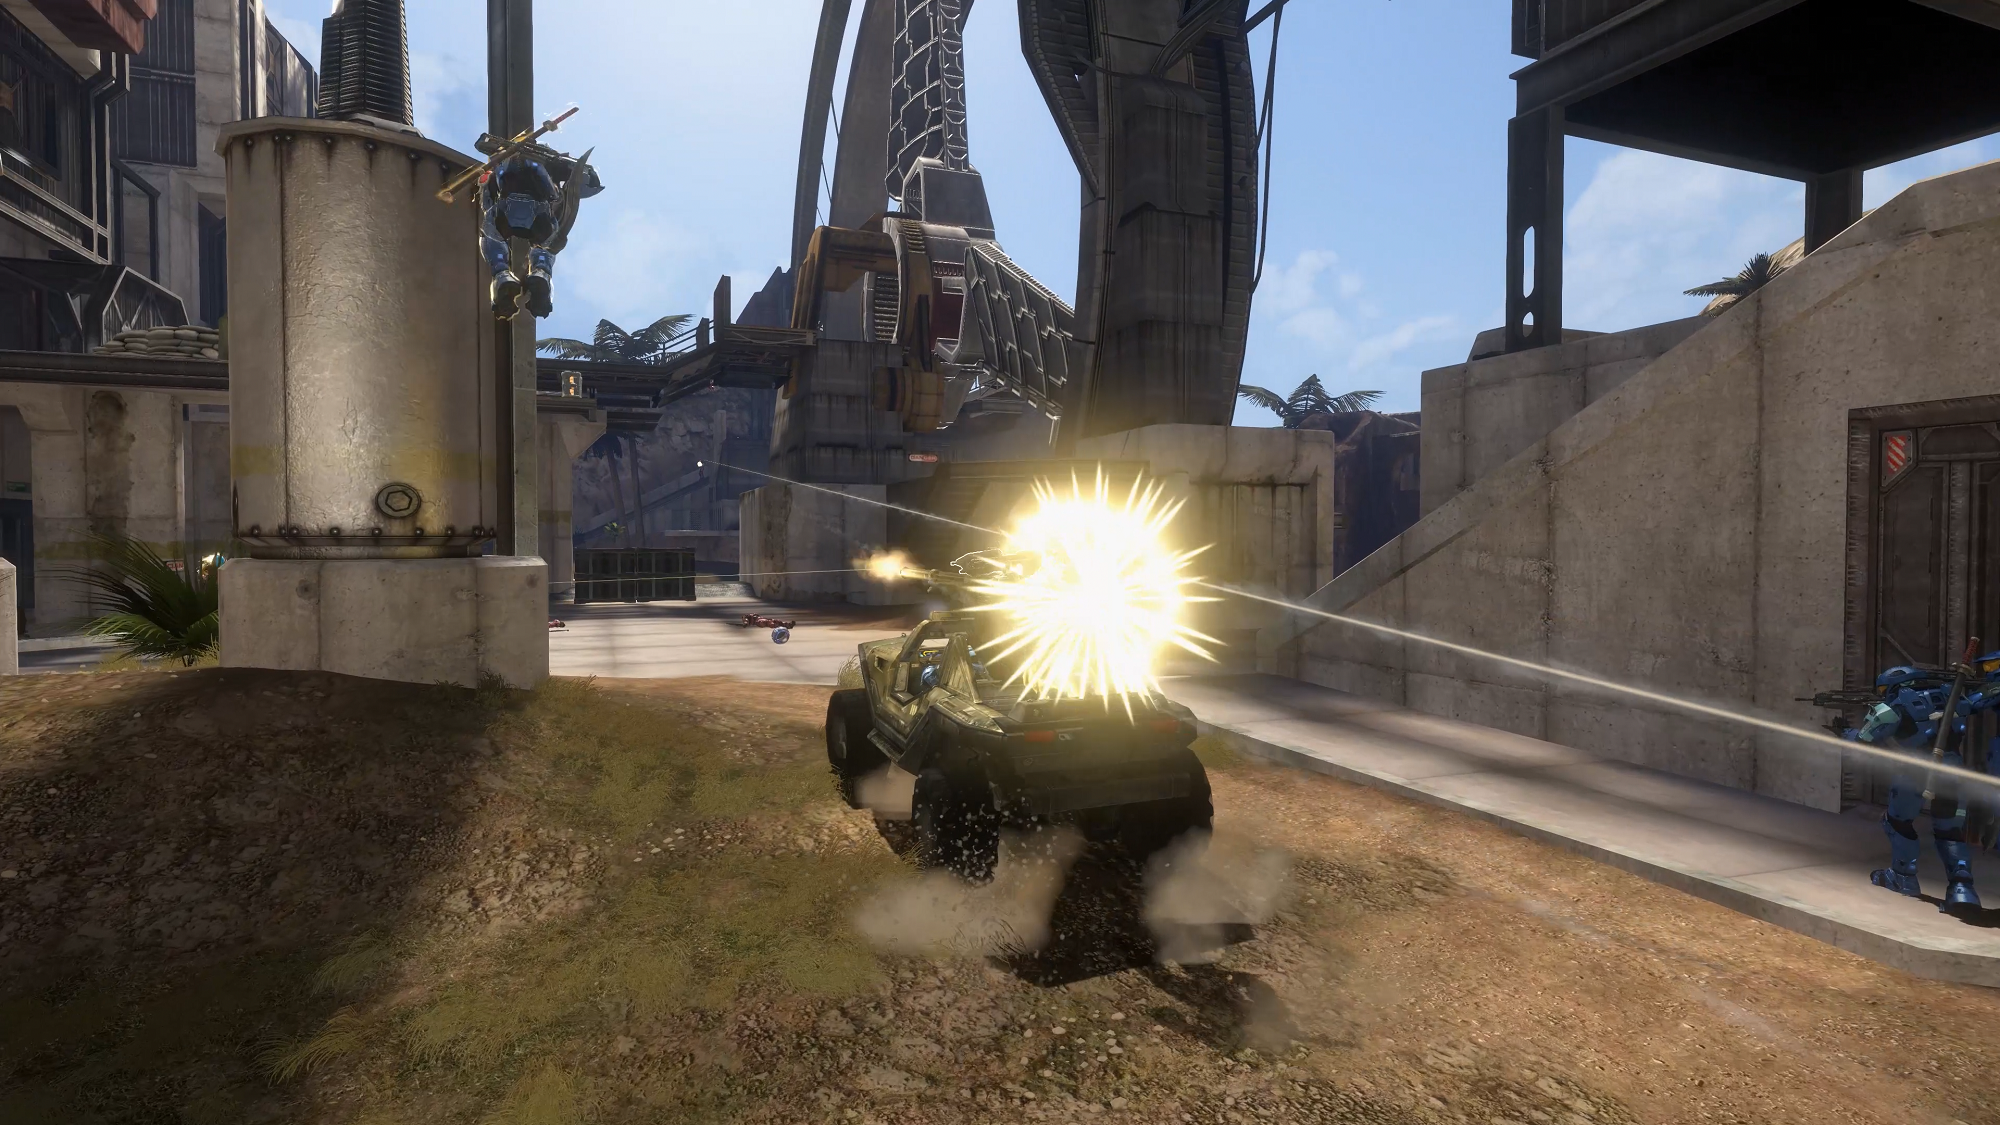 Modders Are Still Working On The Never-Released Halo Online Game